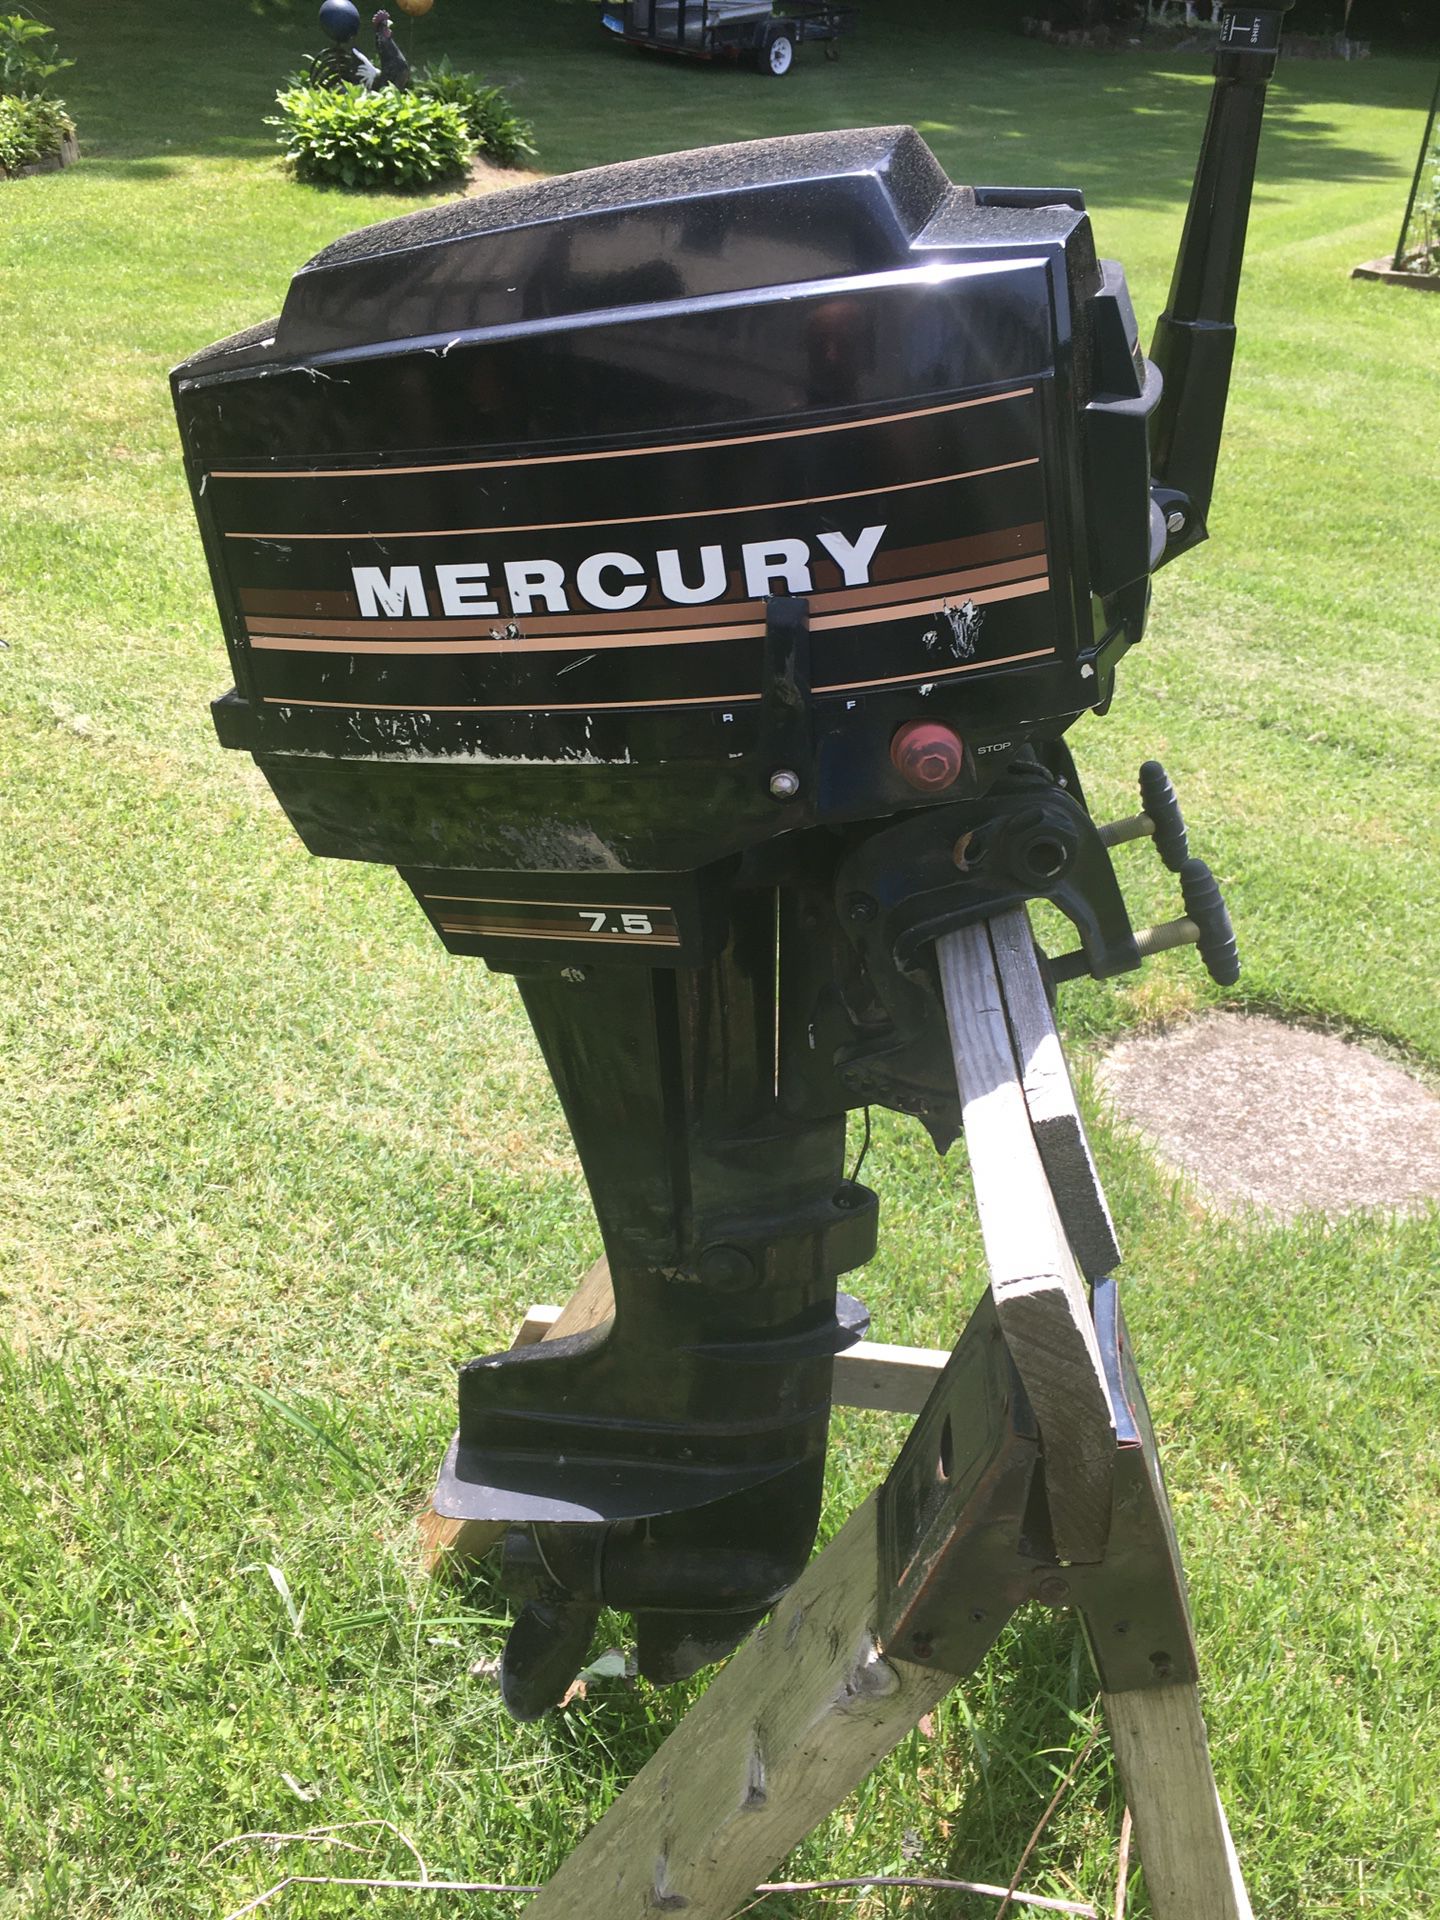 1985 Mercury 7.5 hp outboard motor and fuel tank